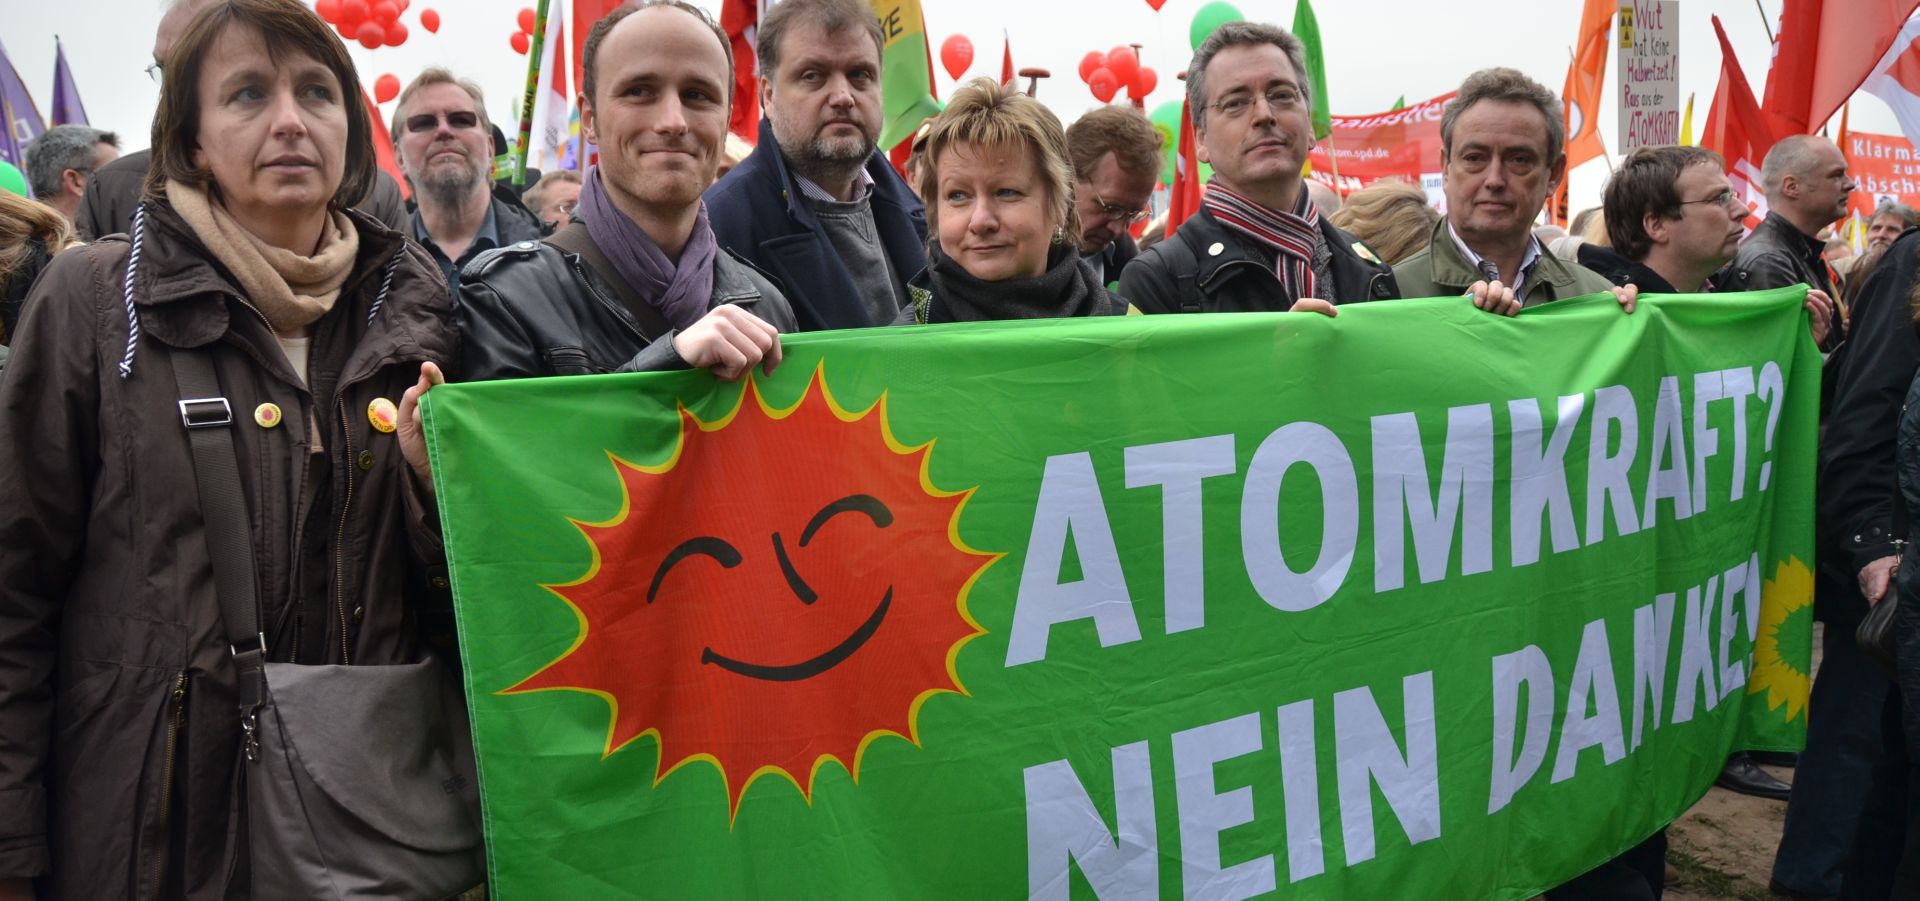 People are demonstrating and holding a banner which says "No to nuclear energy" in German.